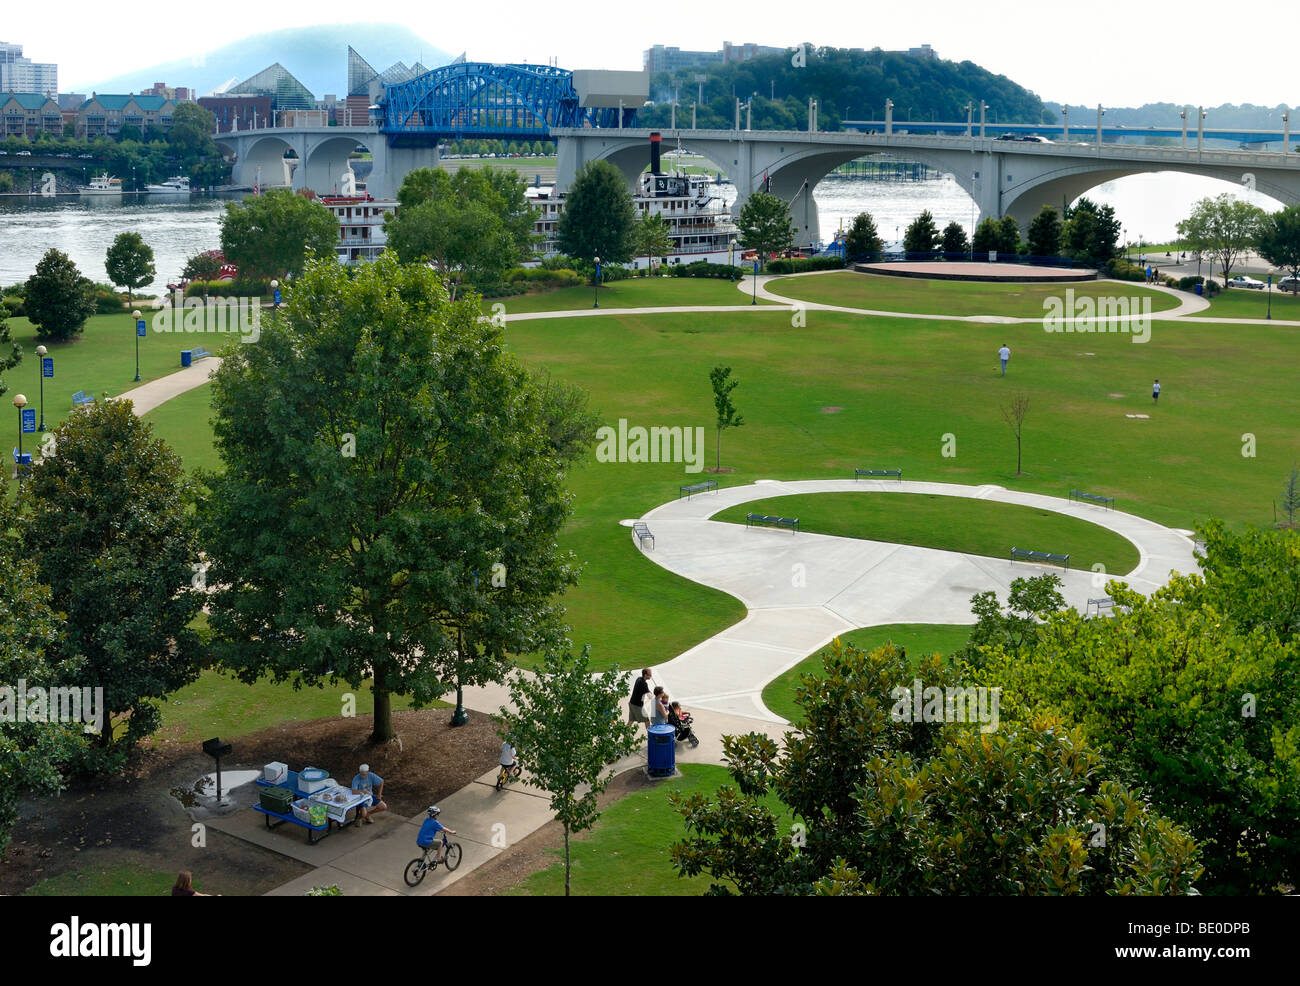 Coolidge Park, Chattanooga, Tennessee Banque D'Images